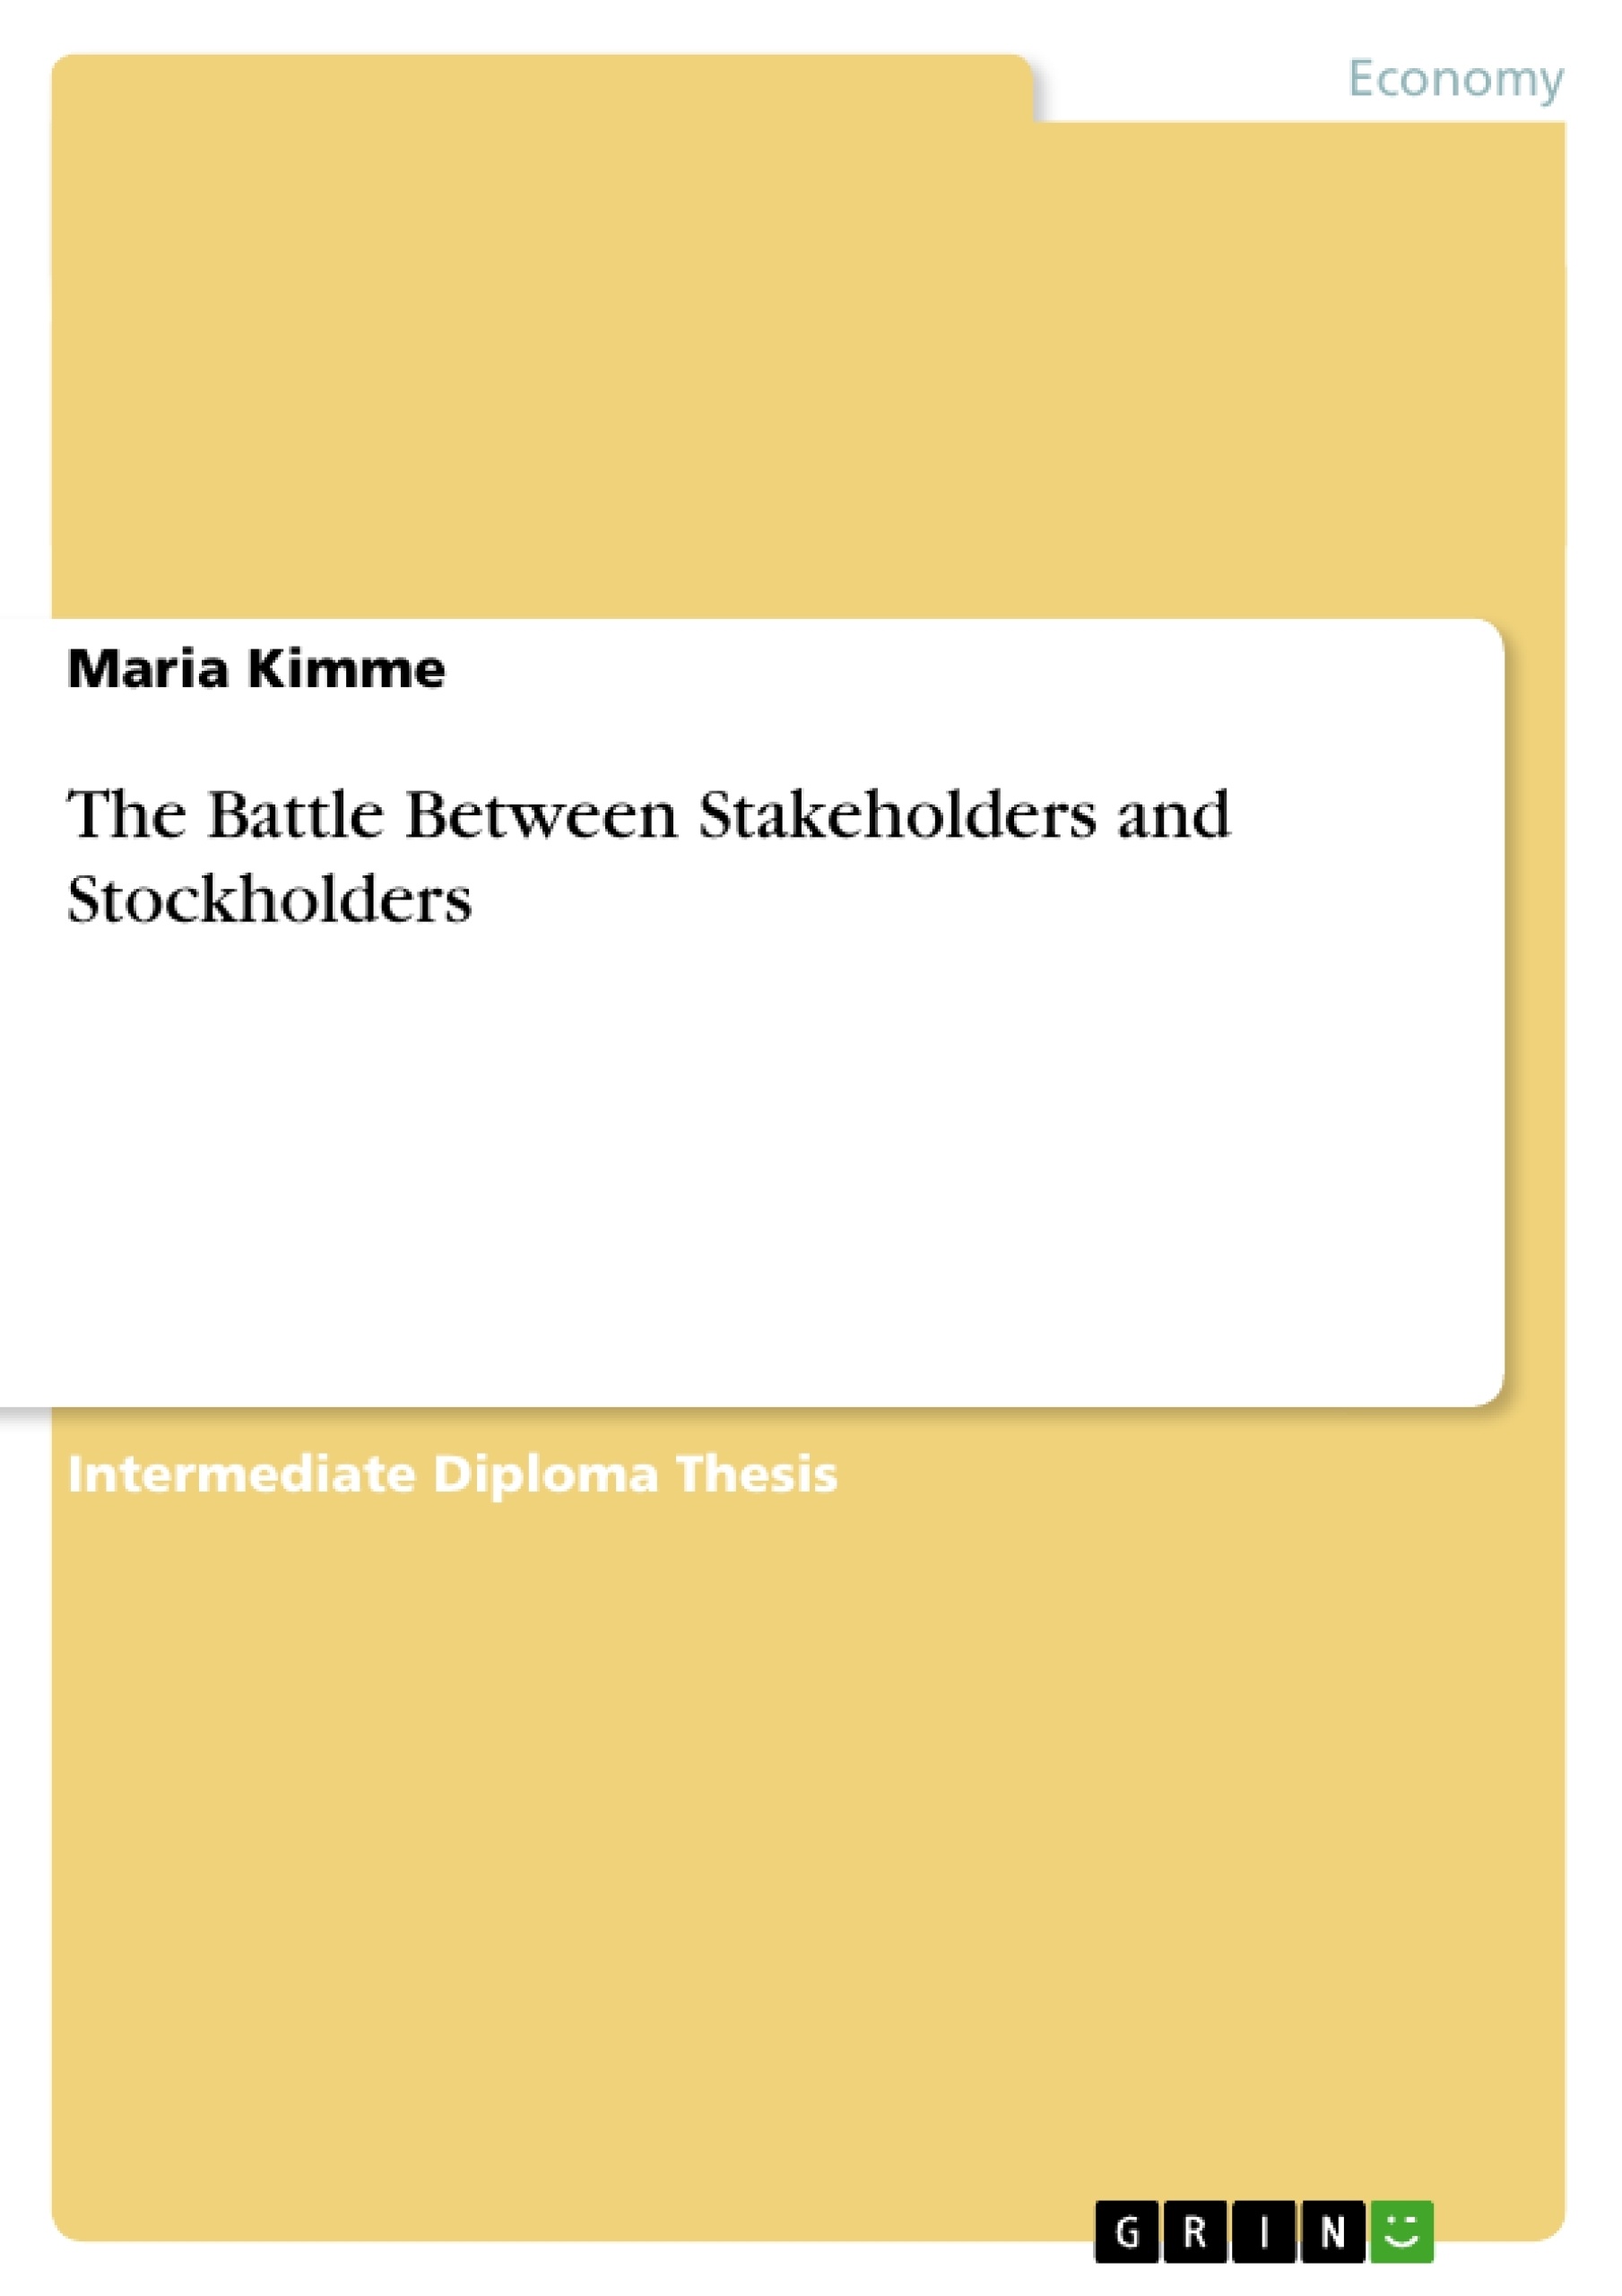 Title: The Battle Between Stakeholders and Stockholders